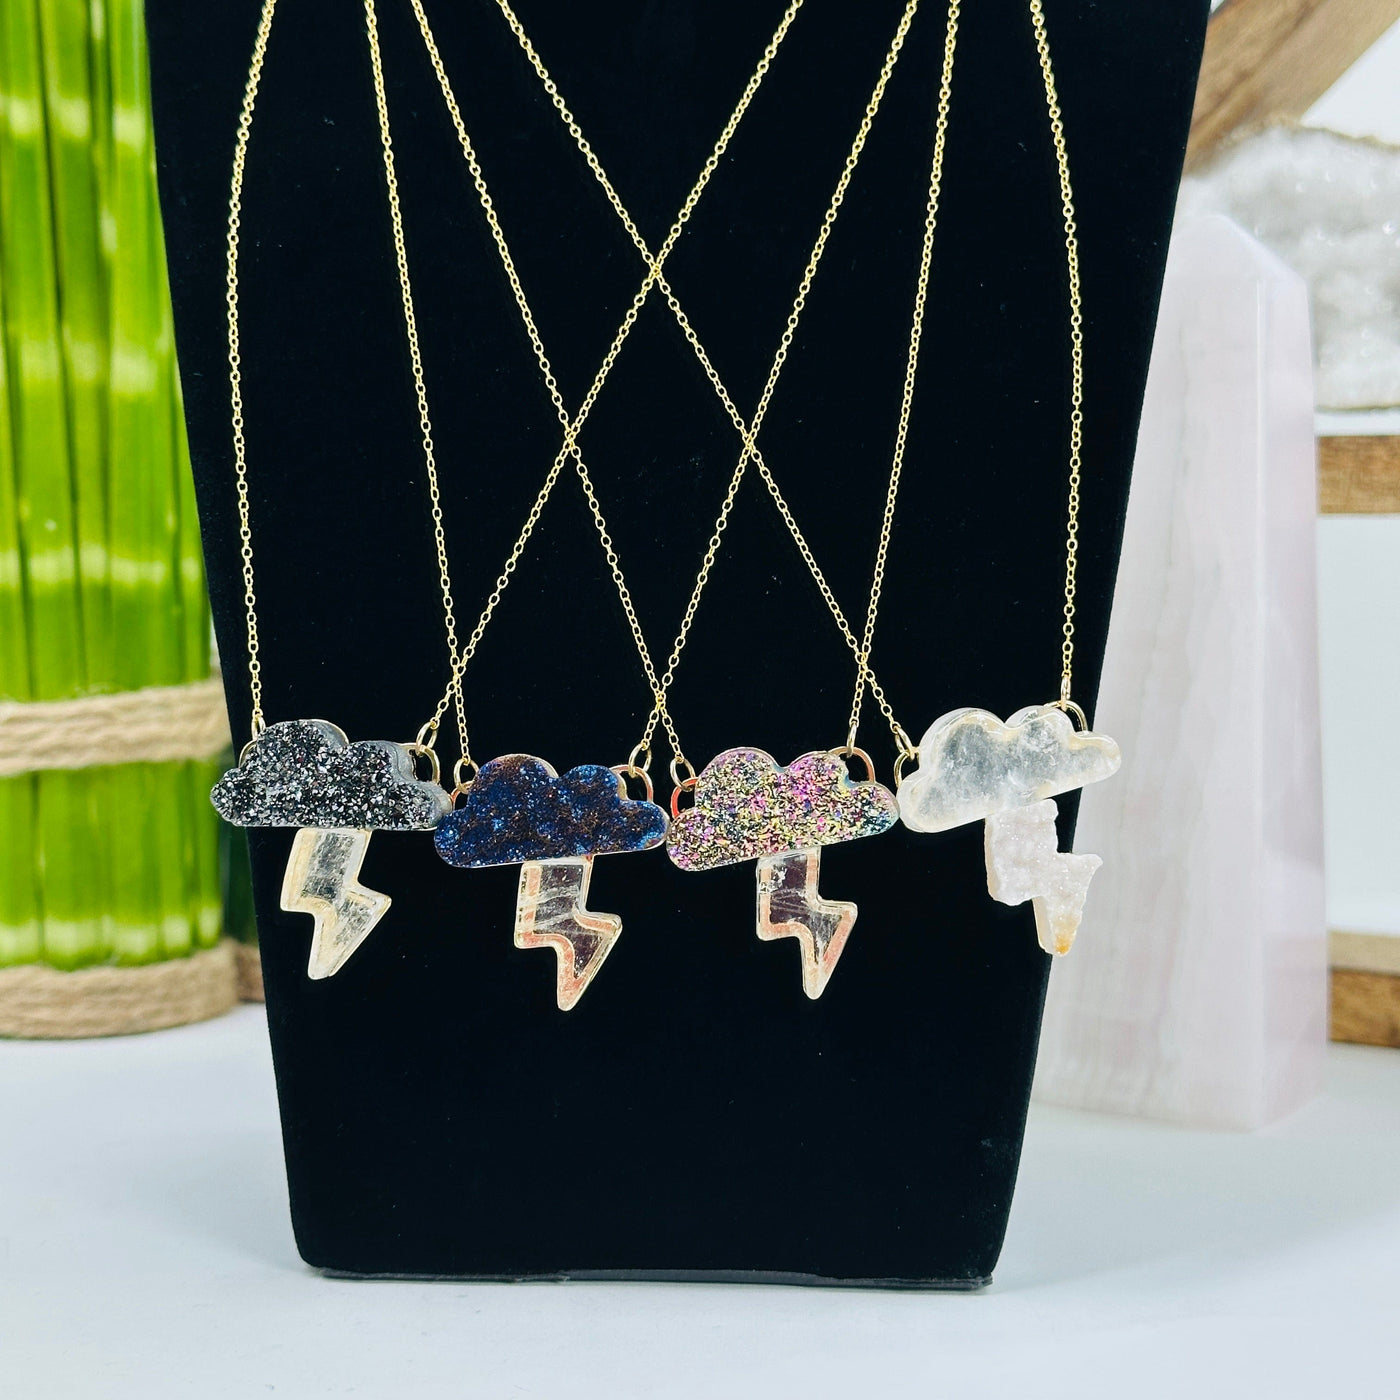 4 cloud with lightning necklaces in gold on a display